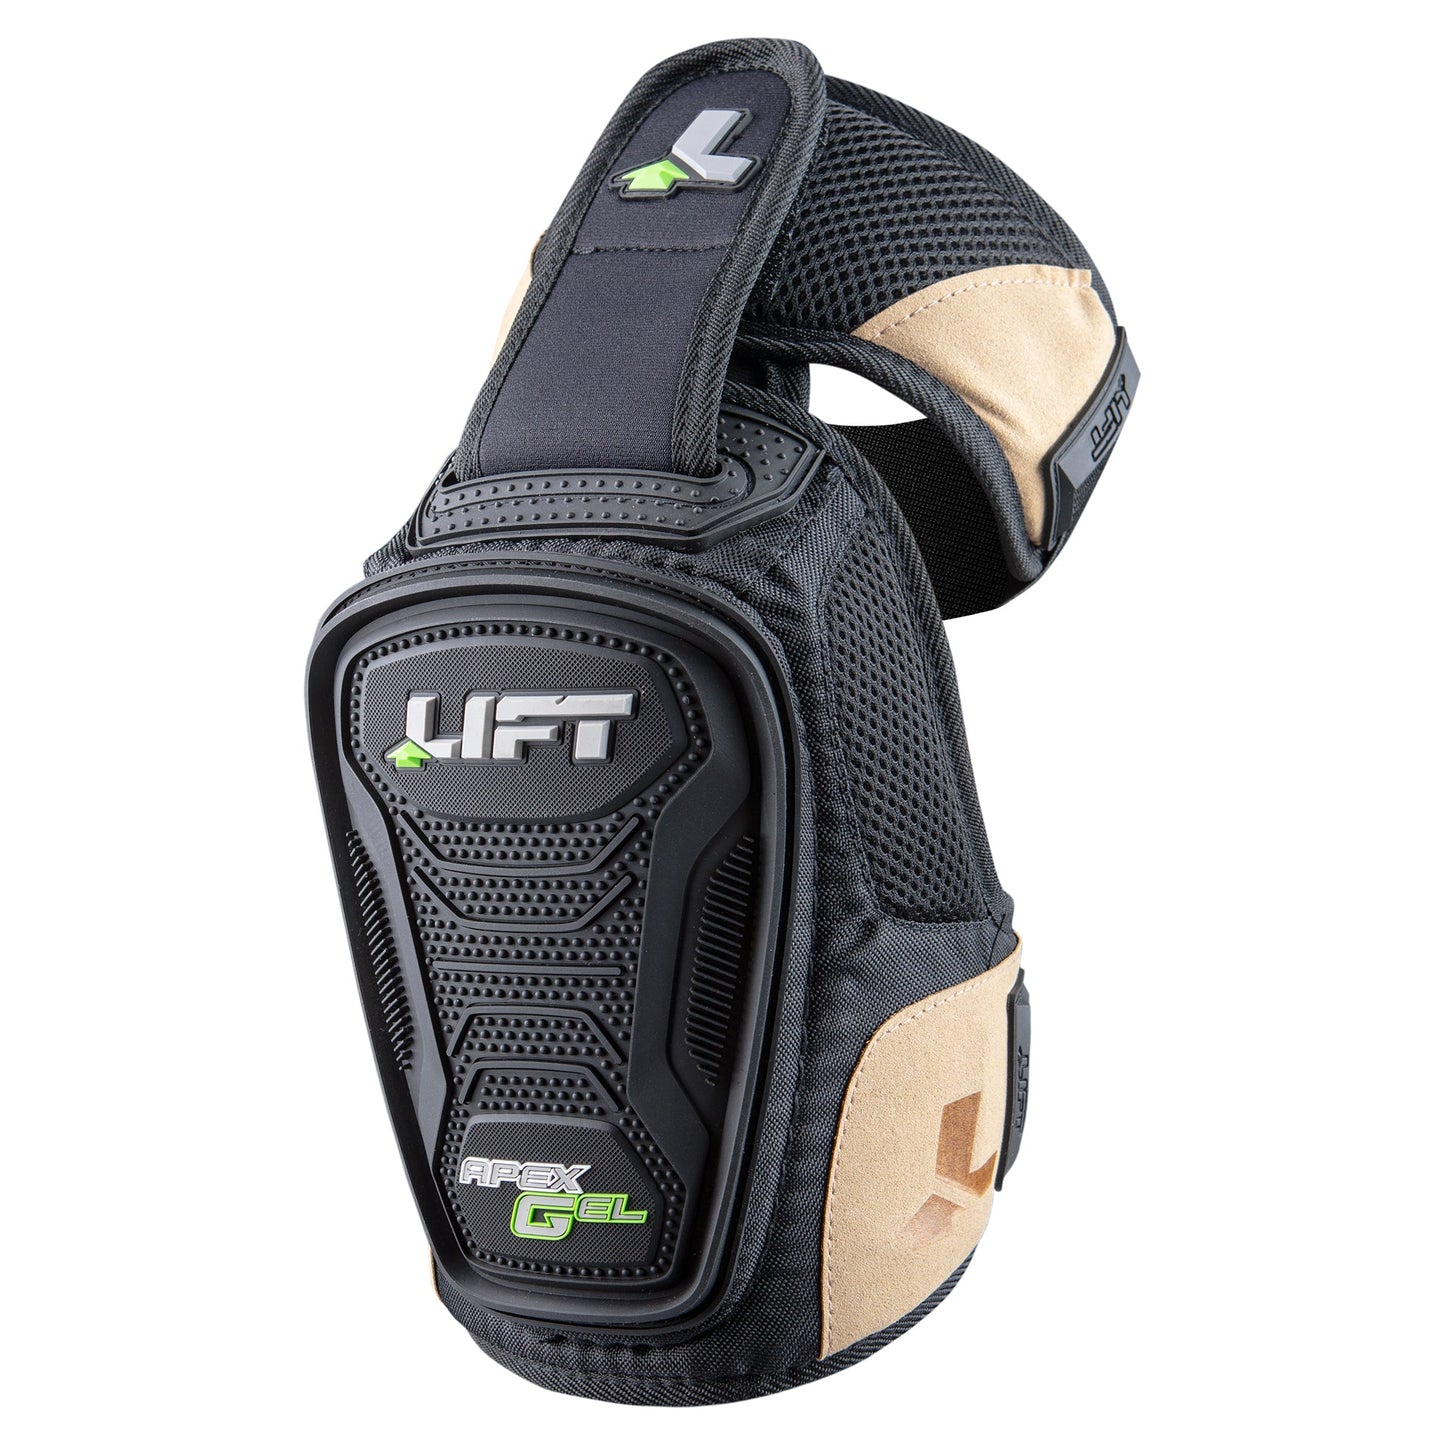 LIFT Safety - APEX GEL Knee Guards